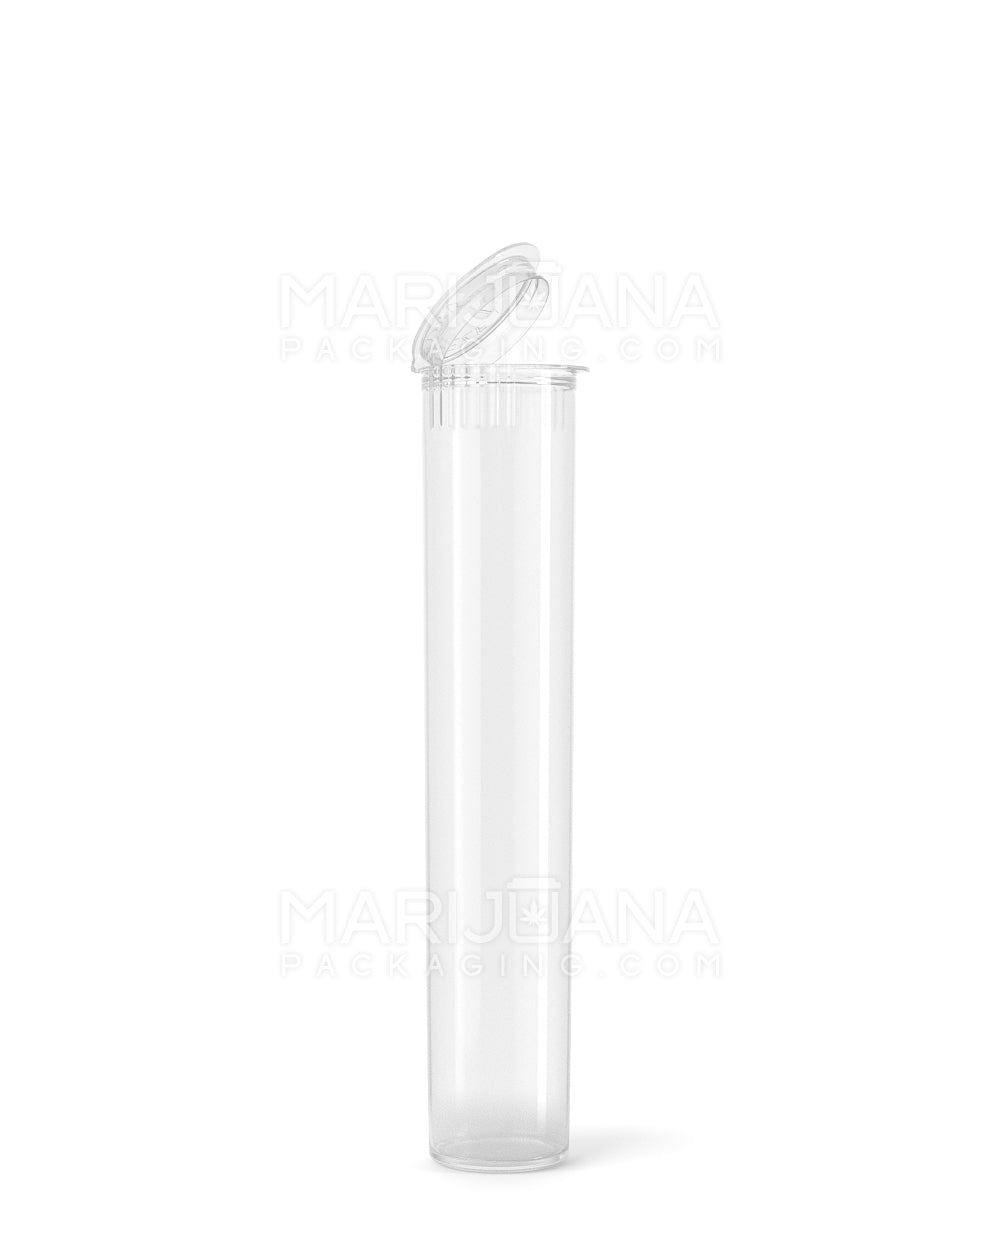 Child Resistant | Pop Top Plastic Pre-Roll Tubes | 95mm - Clear - 1000 Count - 1